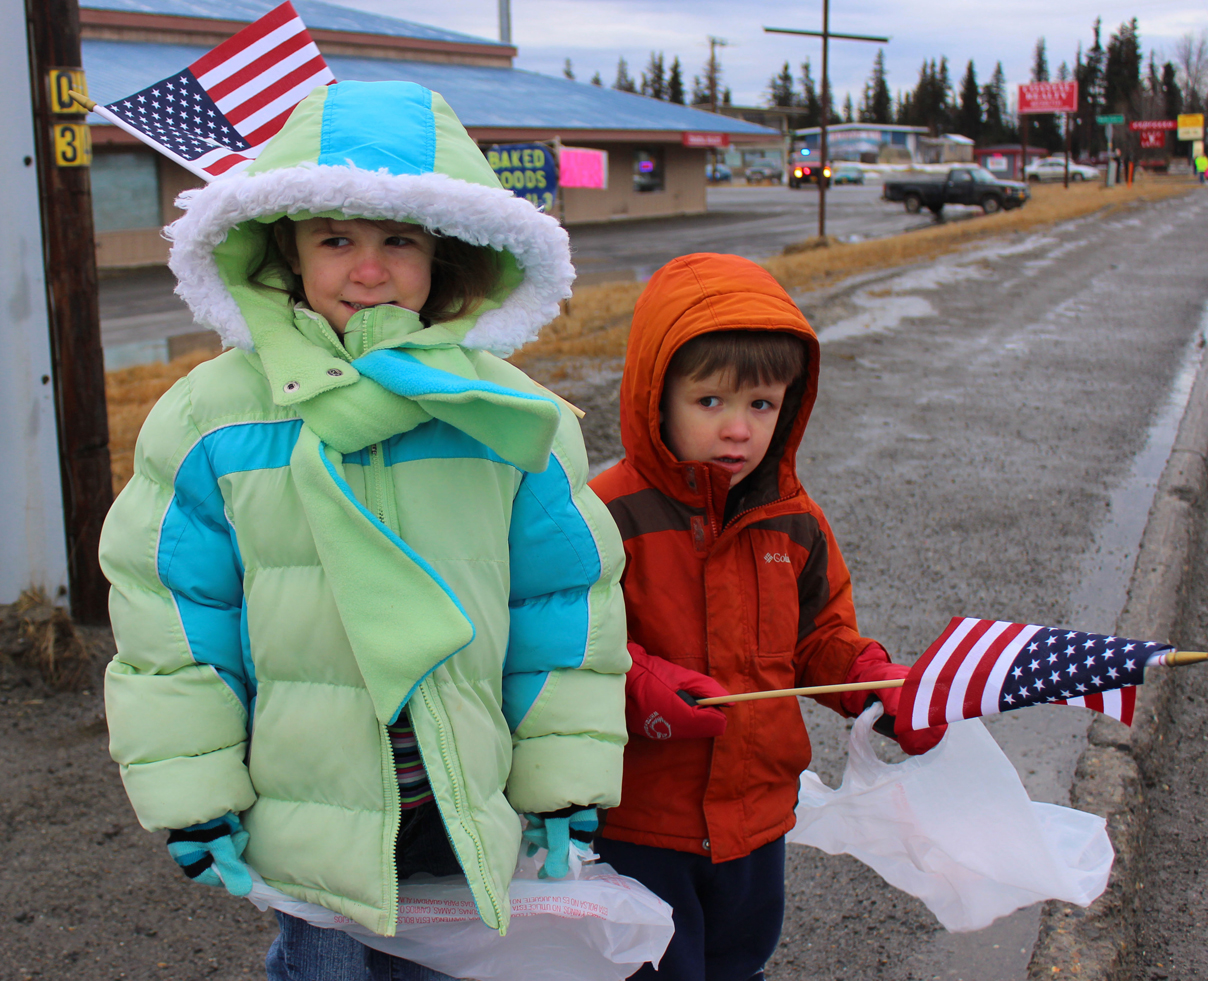 Bundled up against a chilly wind, Morgan and Quinn Kelly have bags in hand to collect candy during last Saturday morning’s Anchor Point Snow Rondi parade. -Photo by McKibben Jackinsky, Homer News